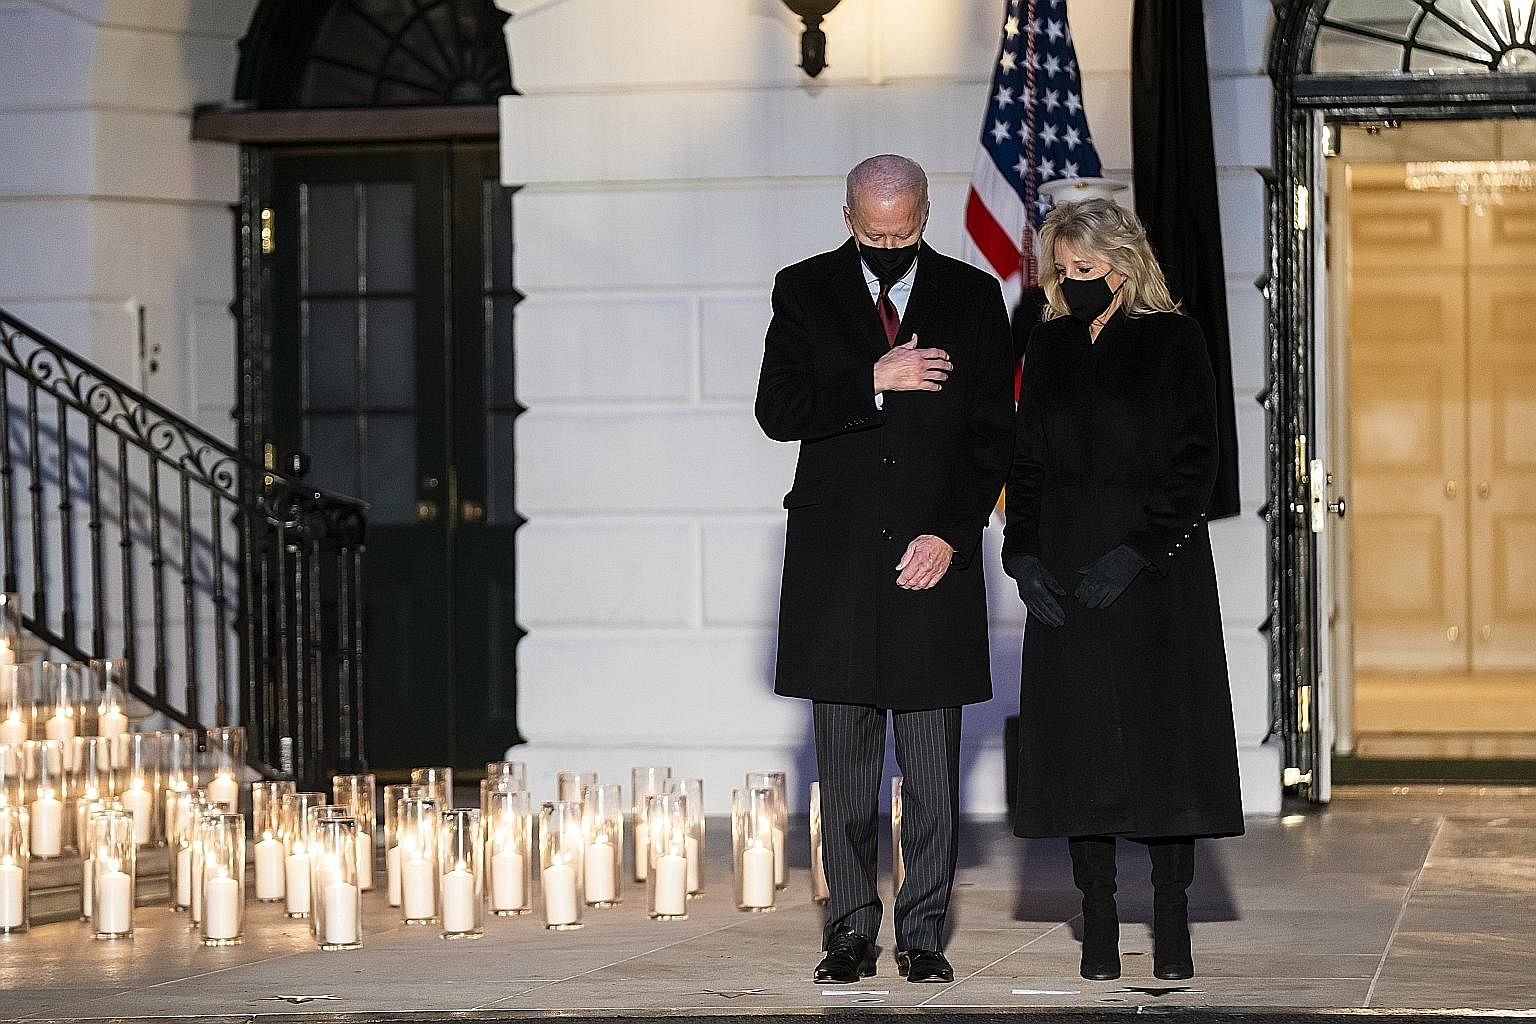 US President Joe Biden and First Lady Jill Biden observing a moment of silence on Monday, at a White House ceremony to mourn the more than 500,000 lives lost to Covid-19 in the country.